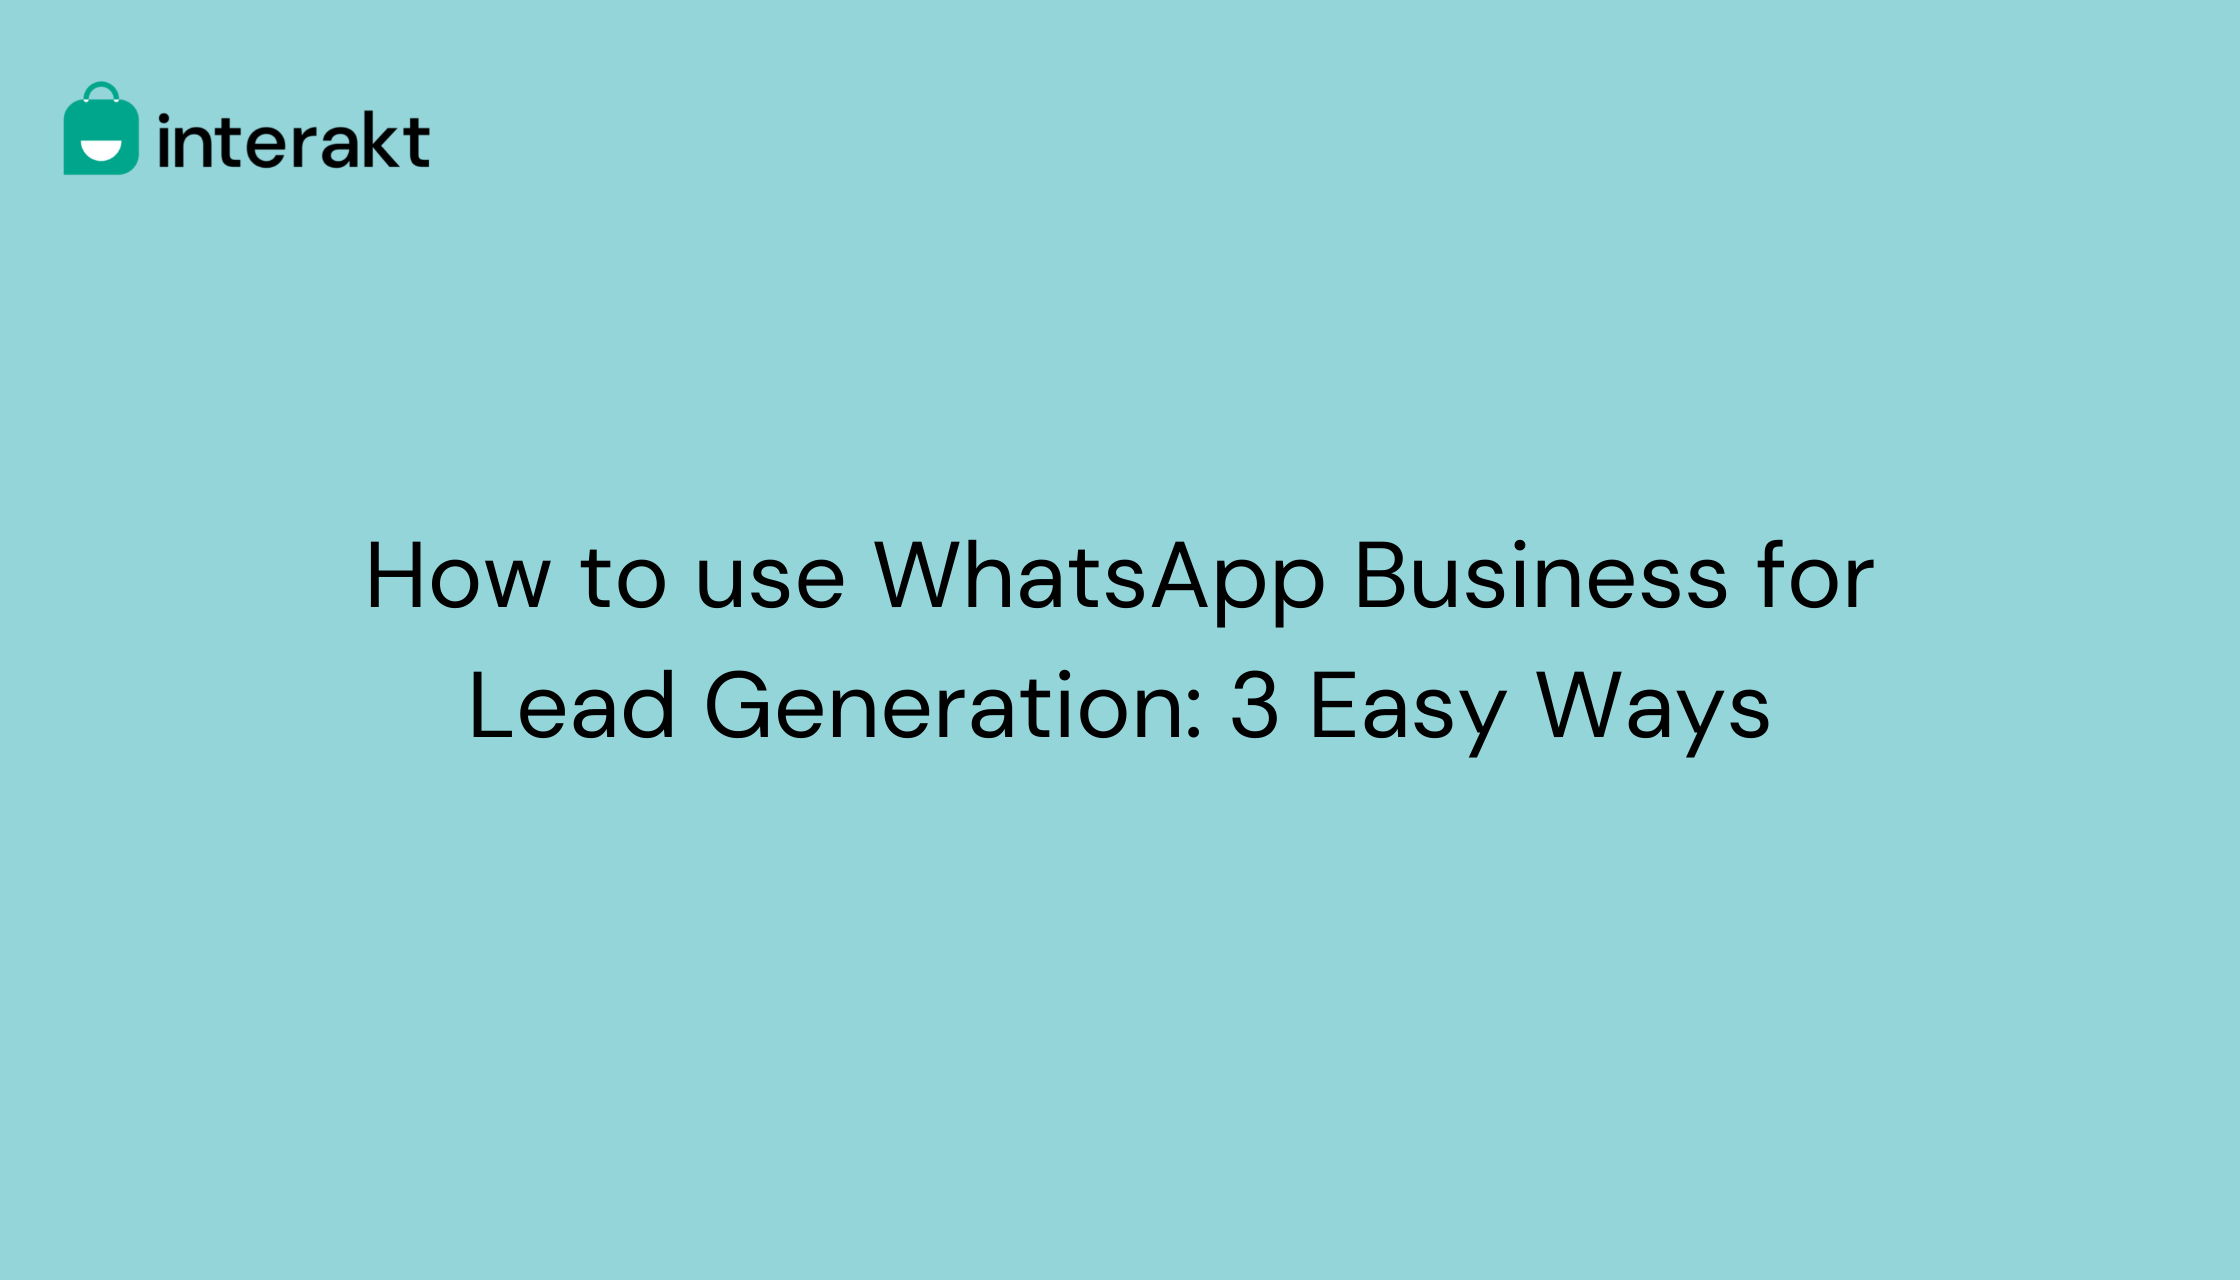 How to use WhatsApp Business for Lead Generation